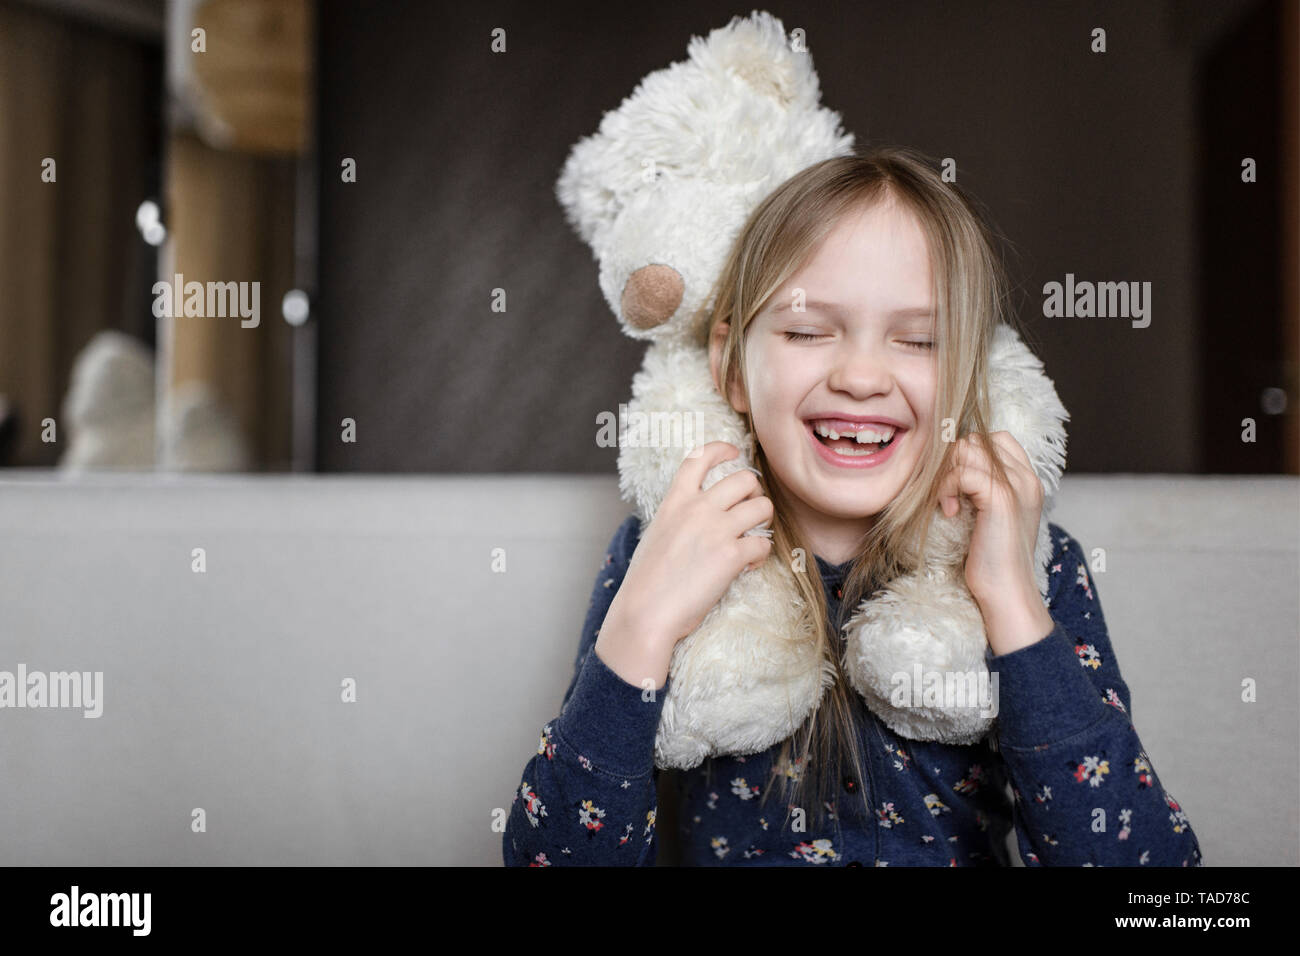 Portrait of laughing little Girl with tooth gap holding white teddy bear Banque D'Images